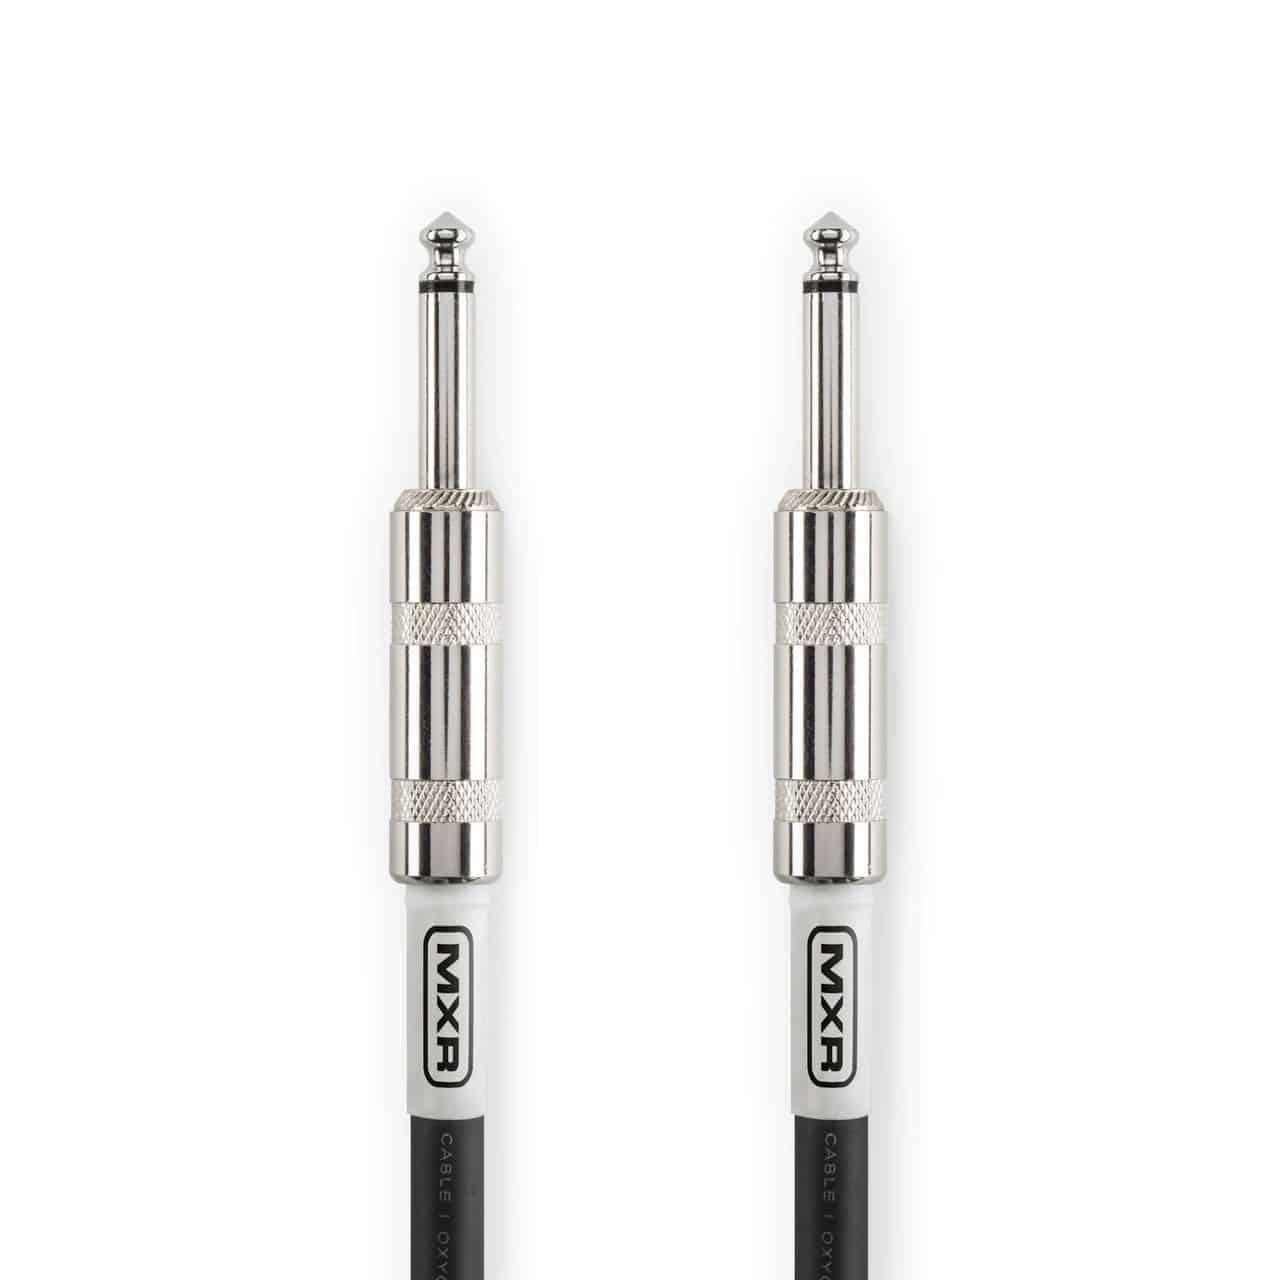 20 Ft Instrument Cable - Accessories - Cables & Adaptors by MXR at Muso's Stuff